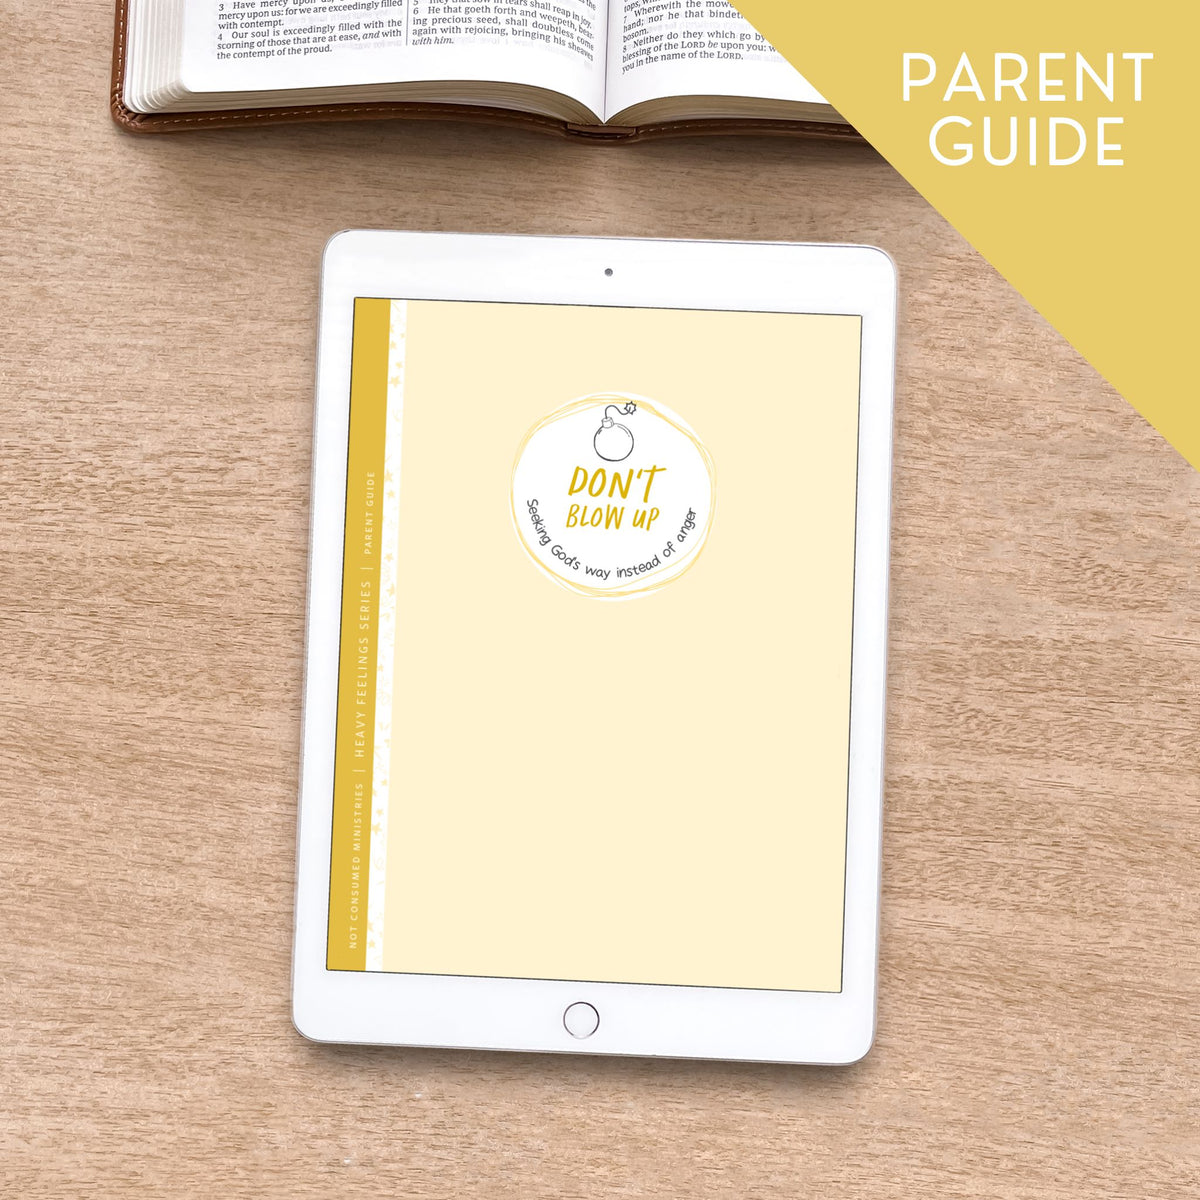 Don&#39;t Blow Up Bible Study on anger parent guide- Digital